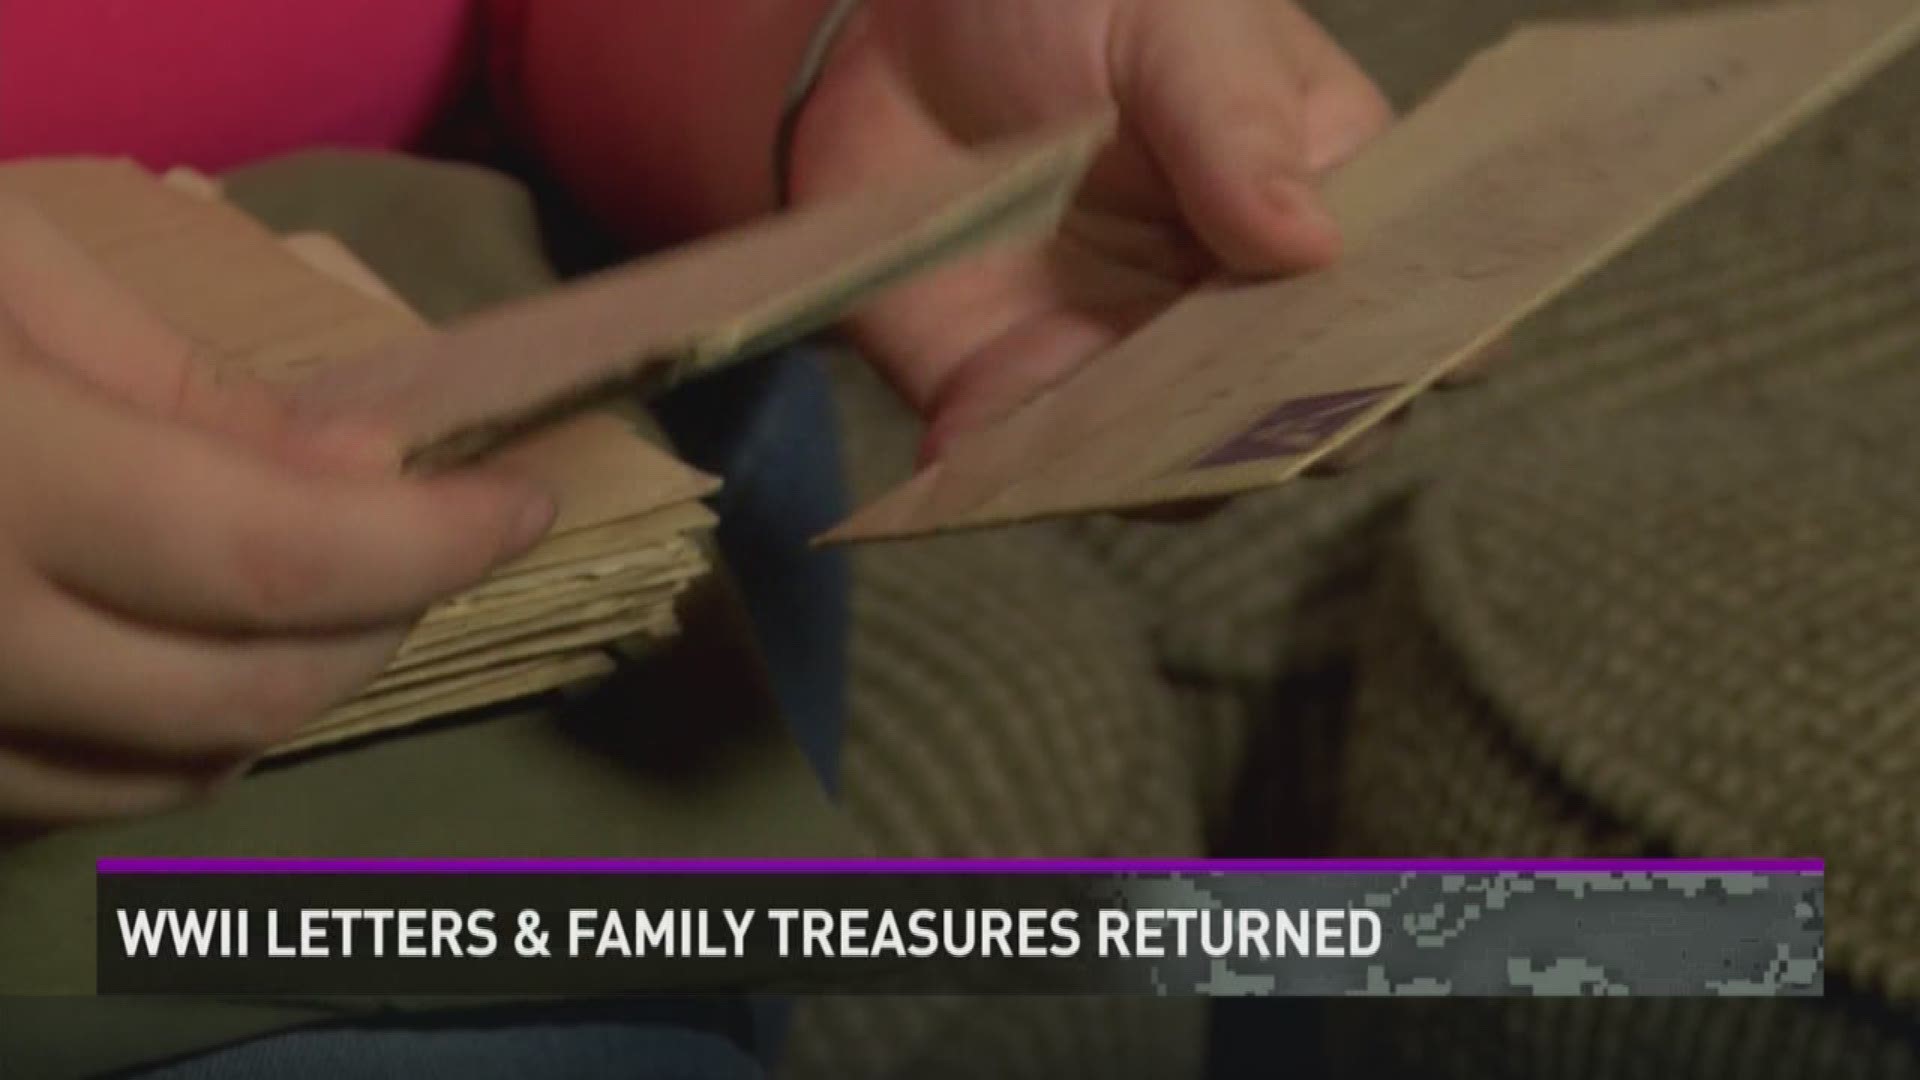 Letters written by a WWII soldier were returned to his family.